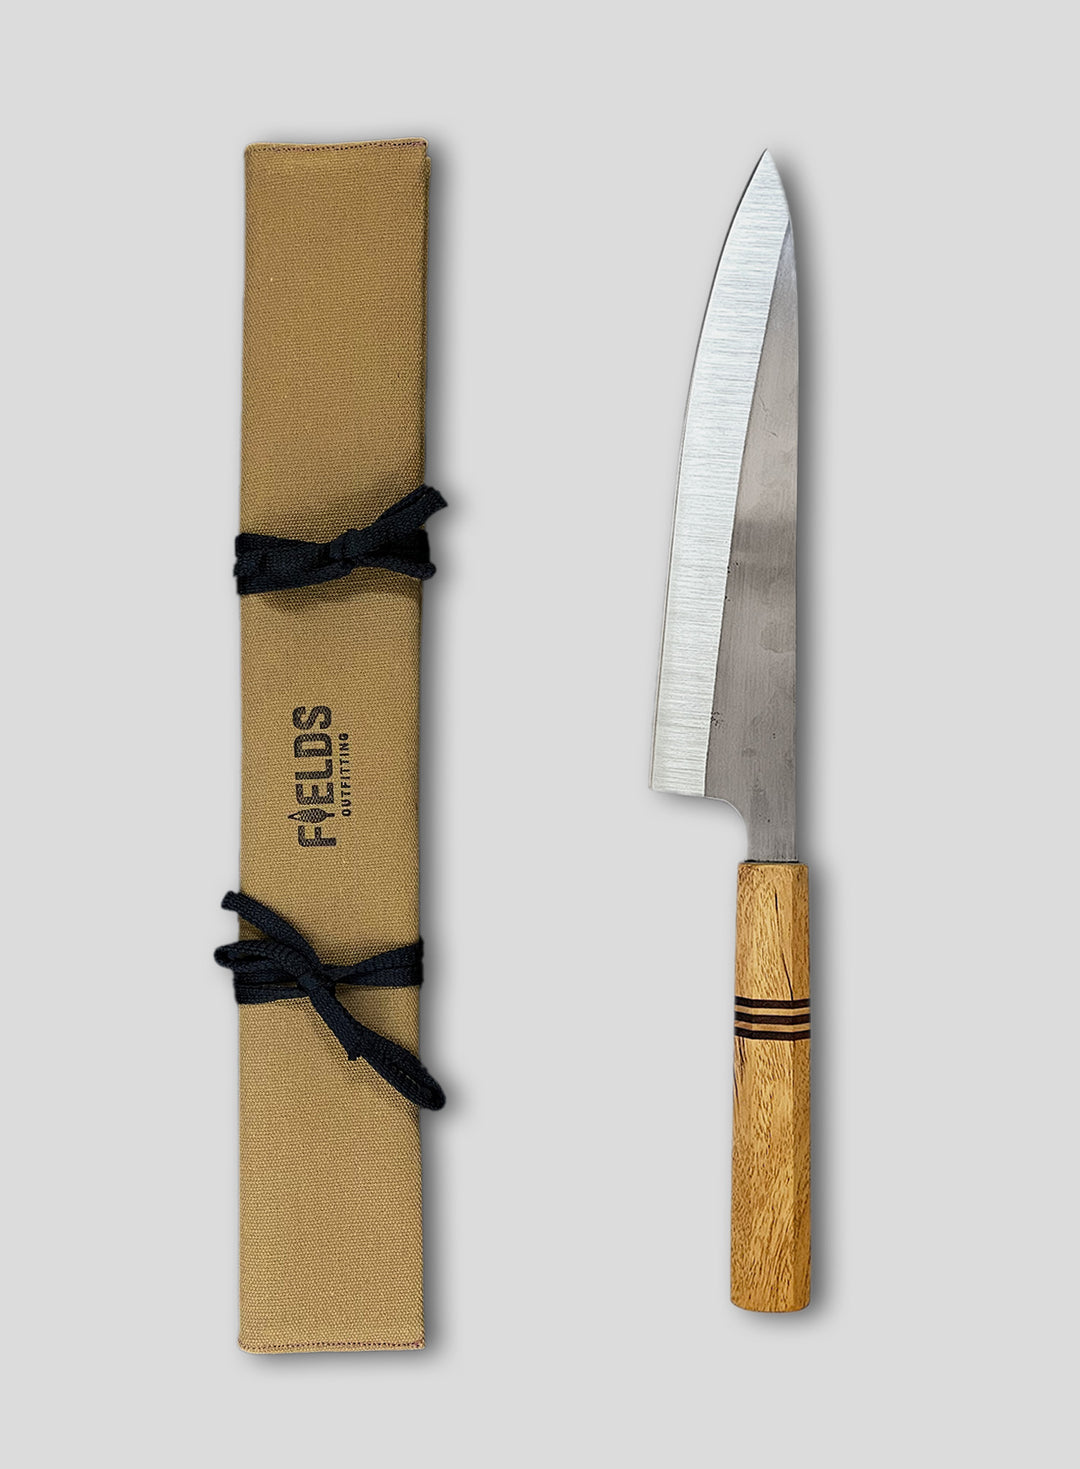 Limited Edition Furia (Yellow Lapacho, Ash and Walnut Handle)